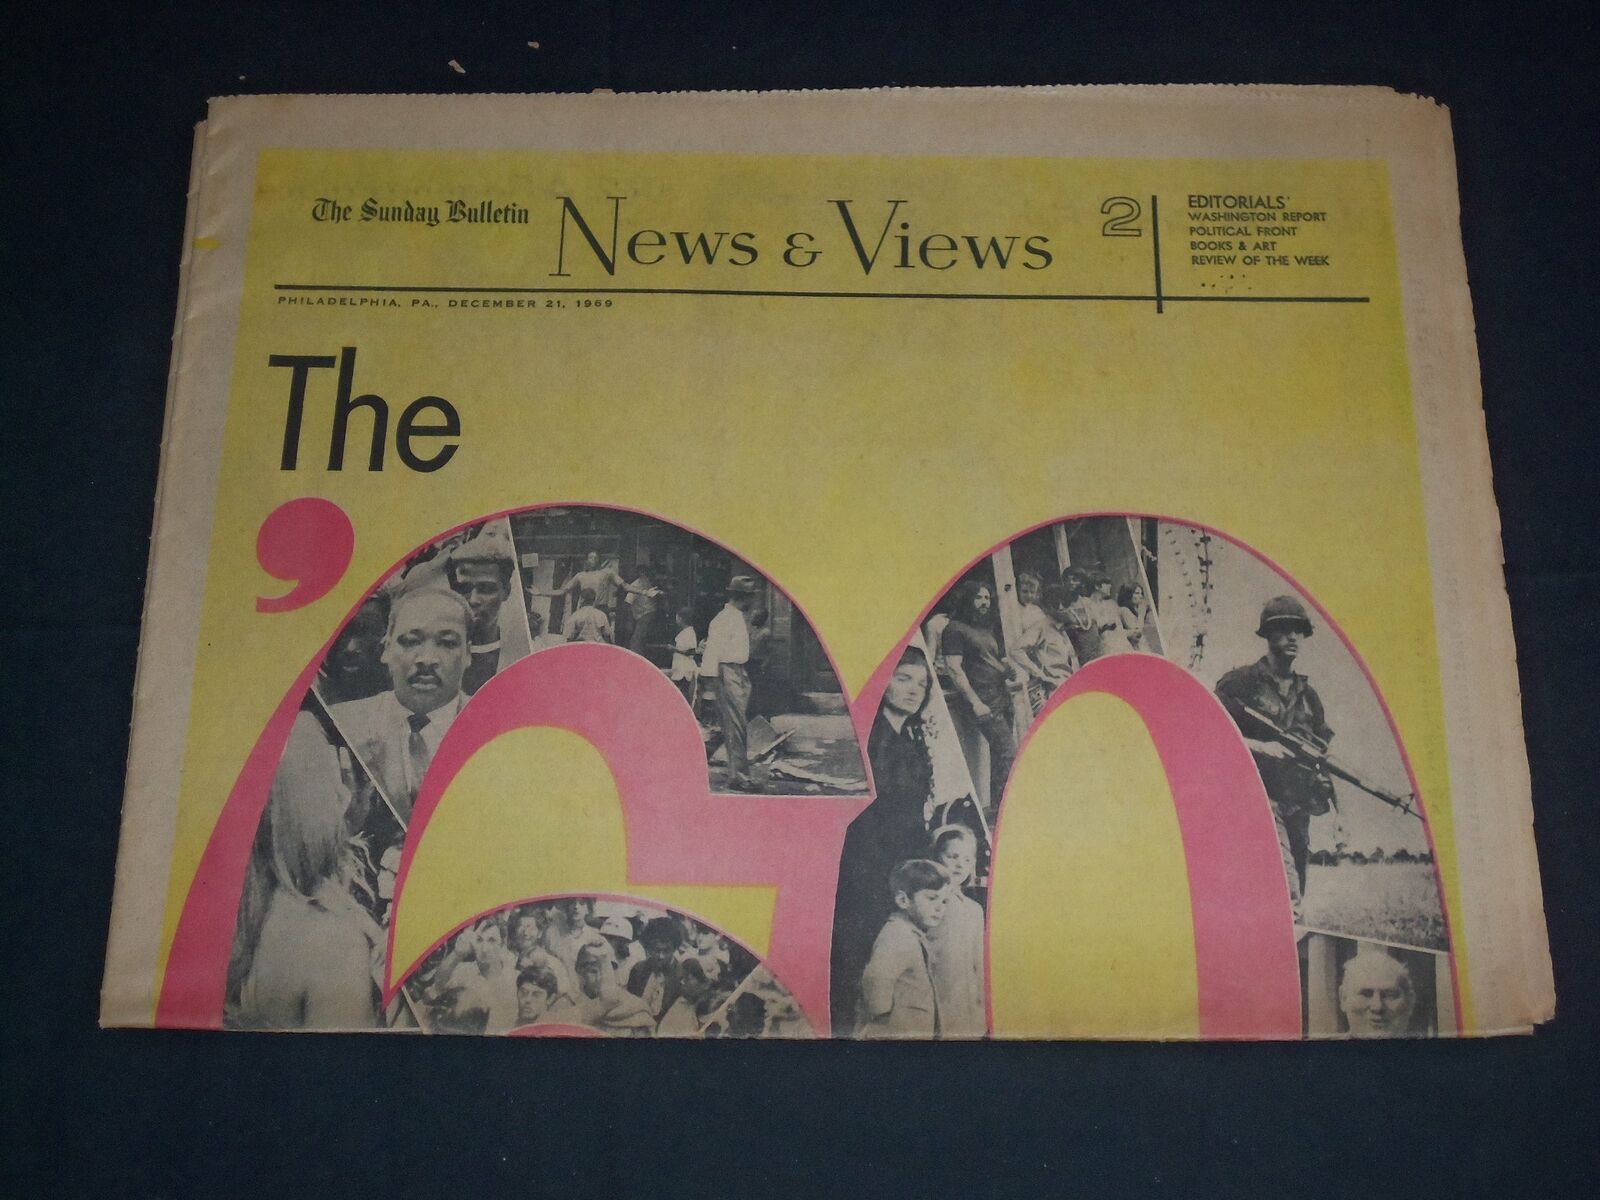 1969 DECEMBER 21 THE SUNDAY BULLETIN NEWSPAPER - THE 60'S DECADE - NP 3393